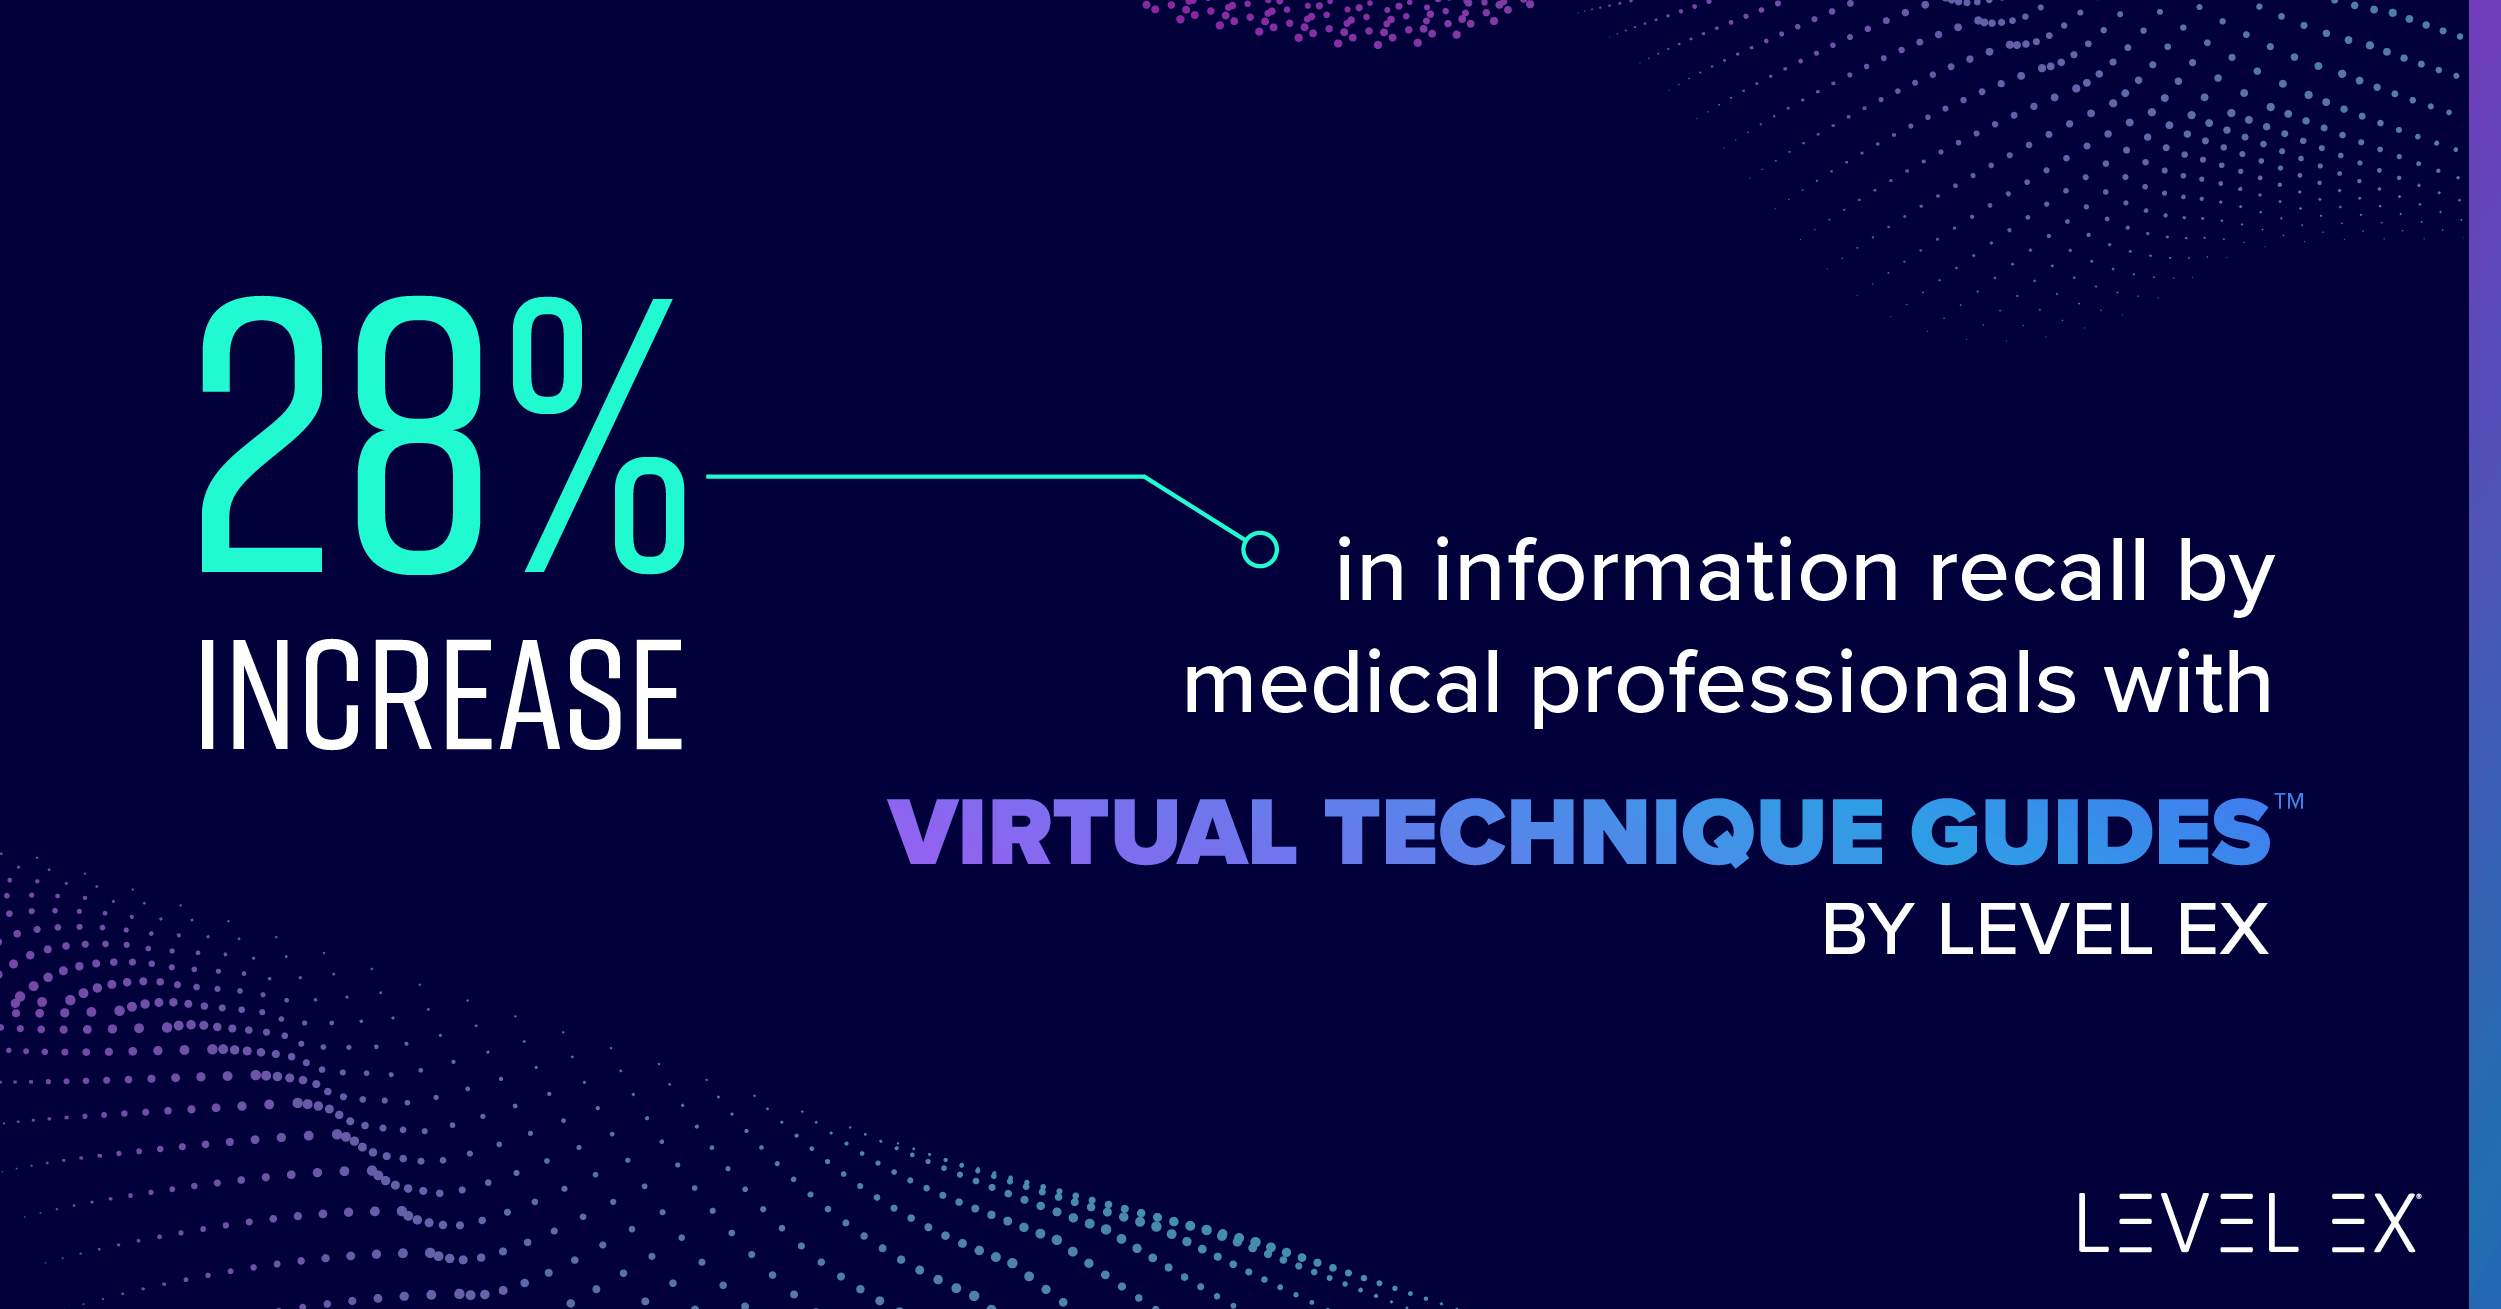 Visual: Level Ex Virtual Technique Guides increased HCP recall by 28%